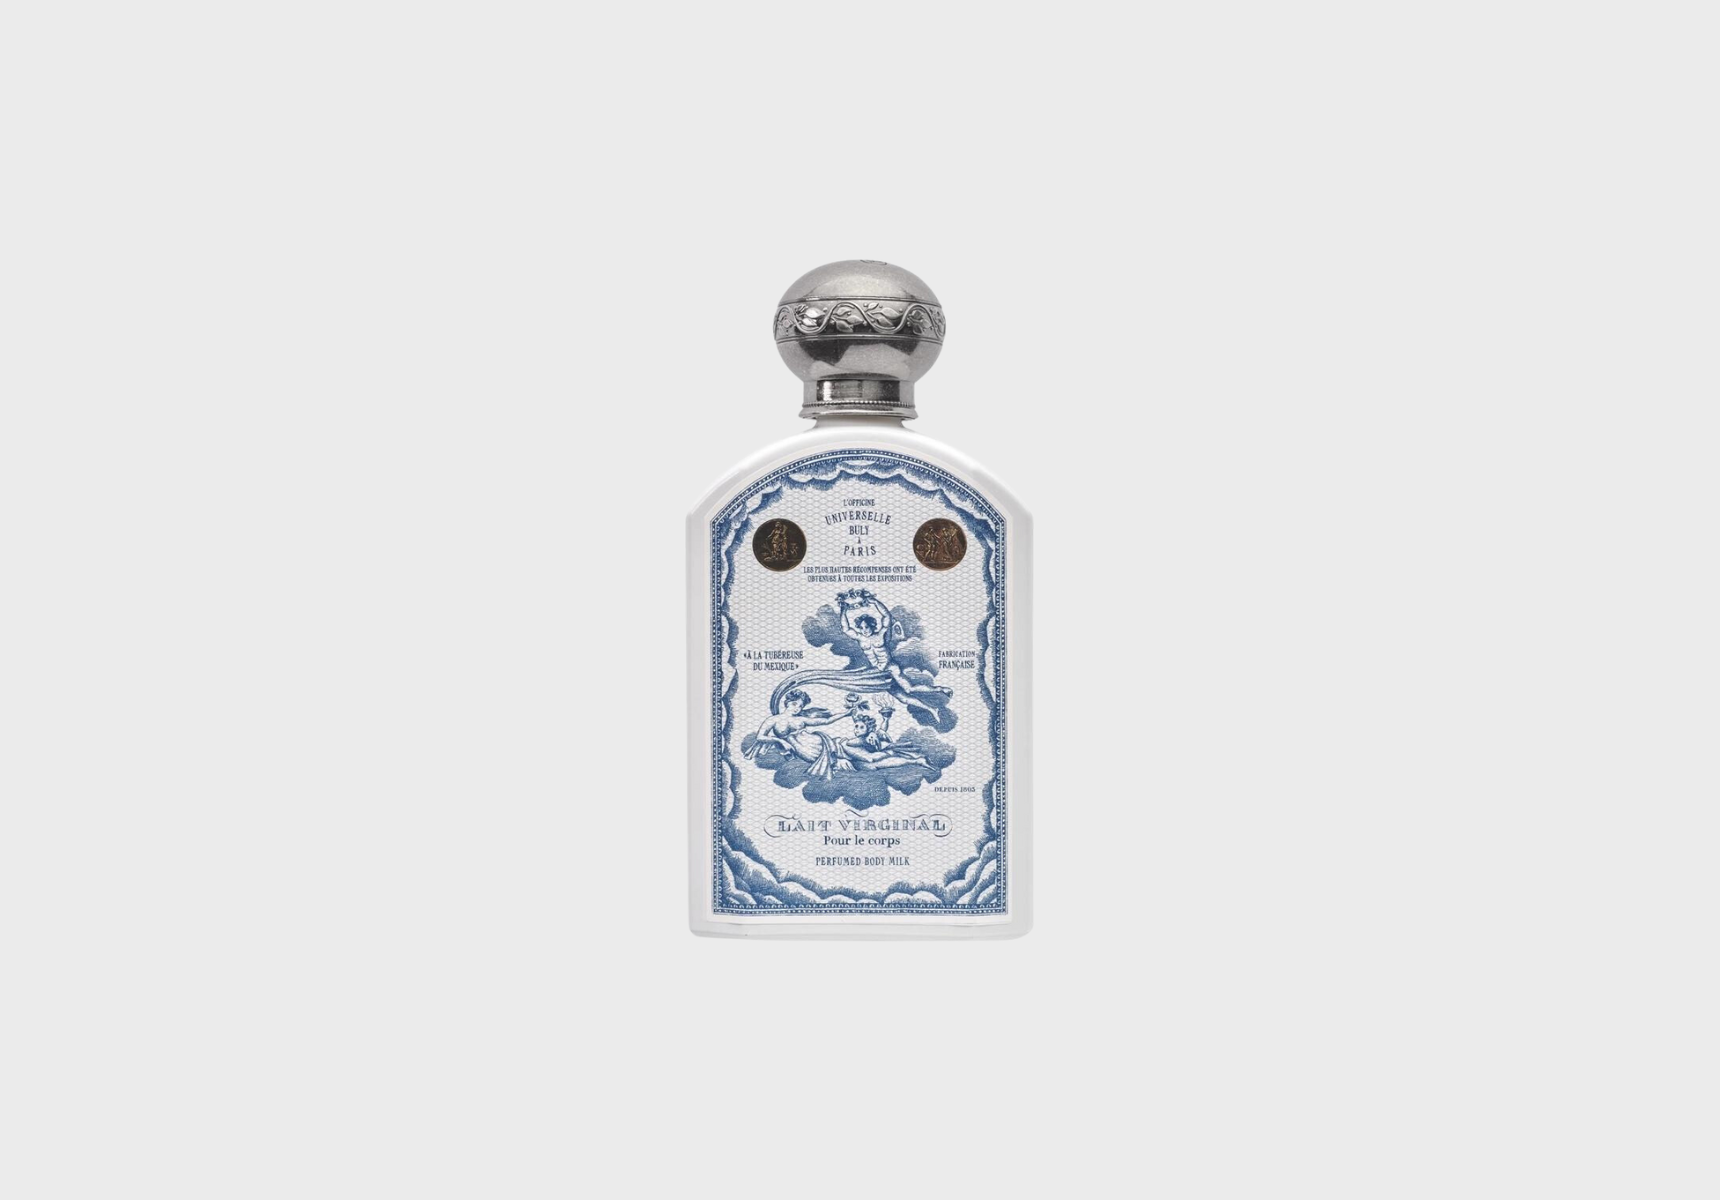 Officine Universelle Buly body milk